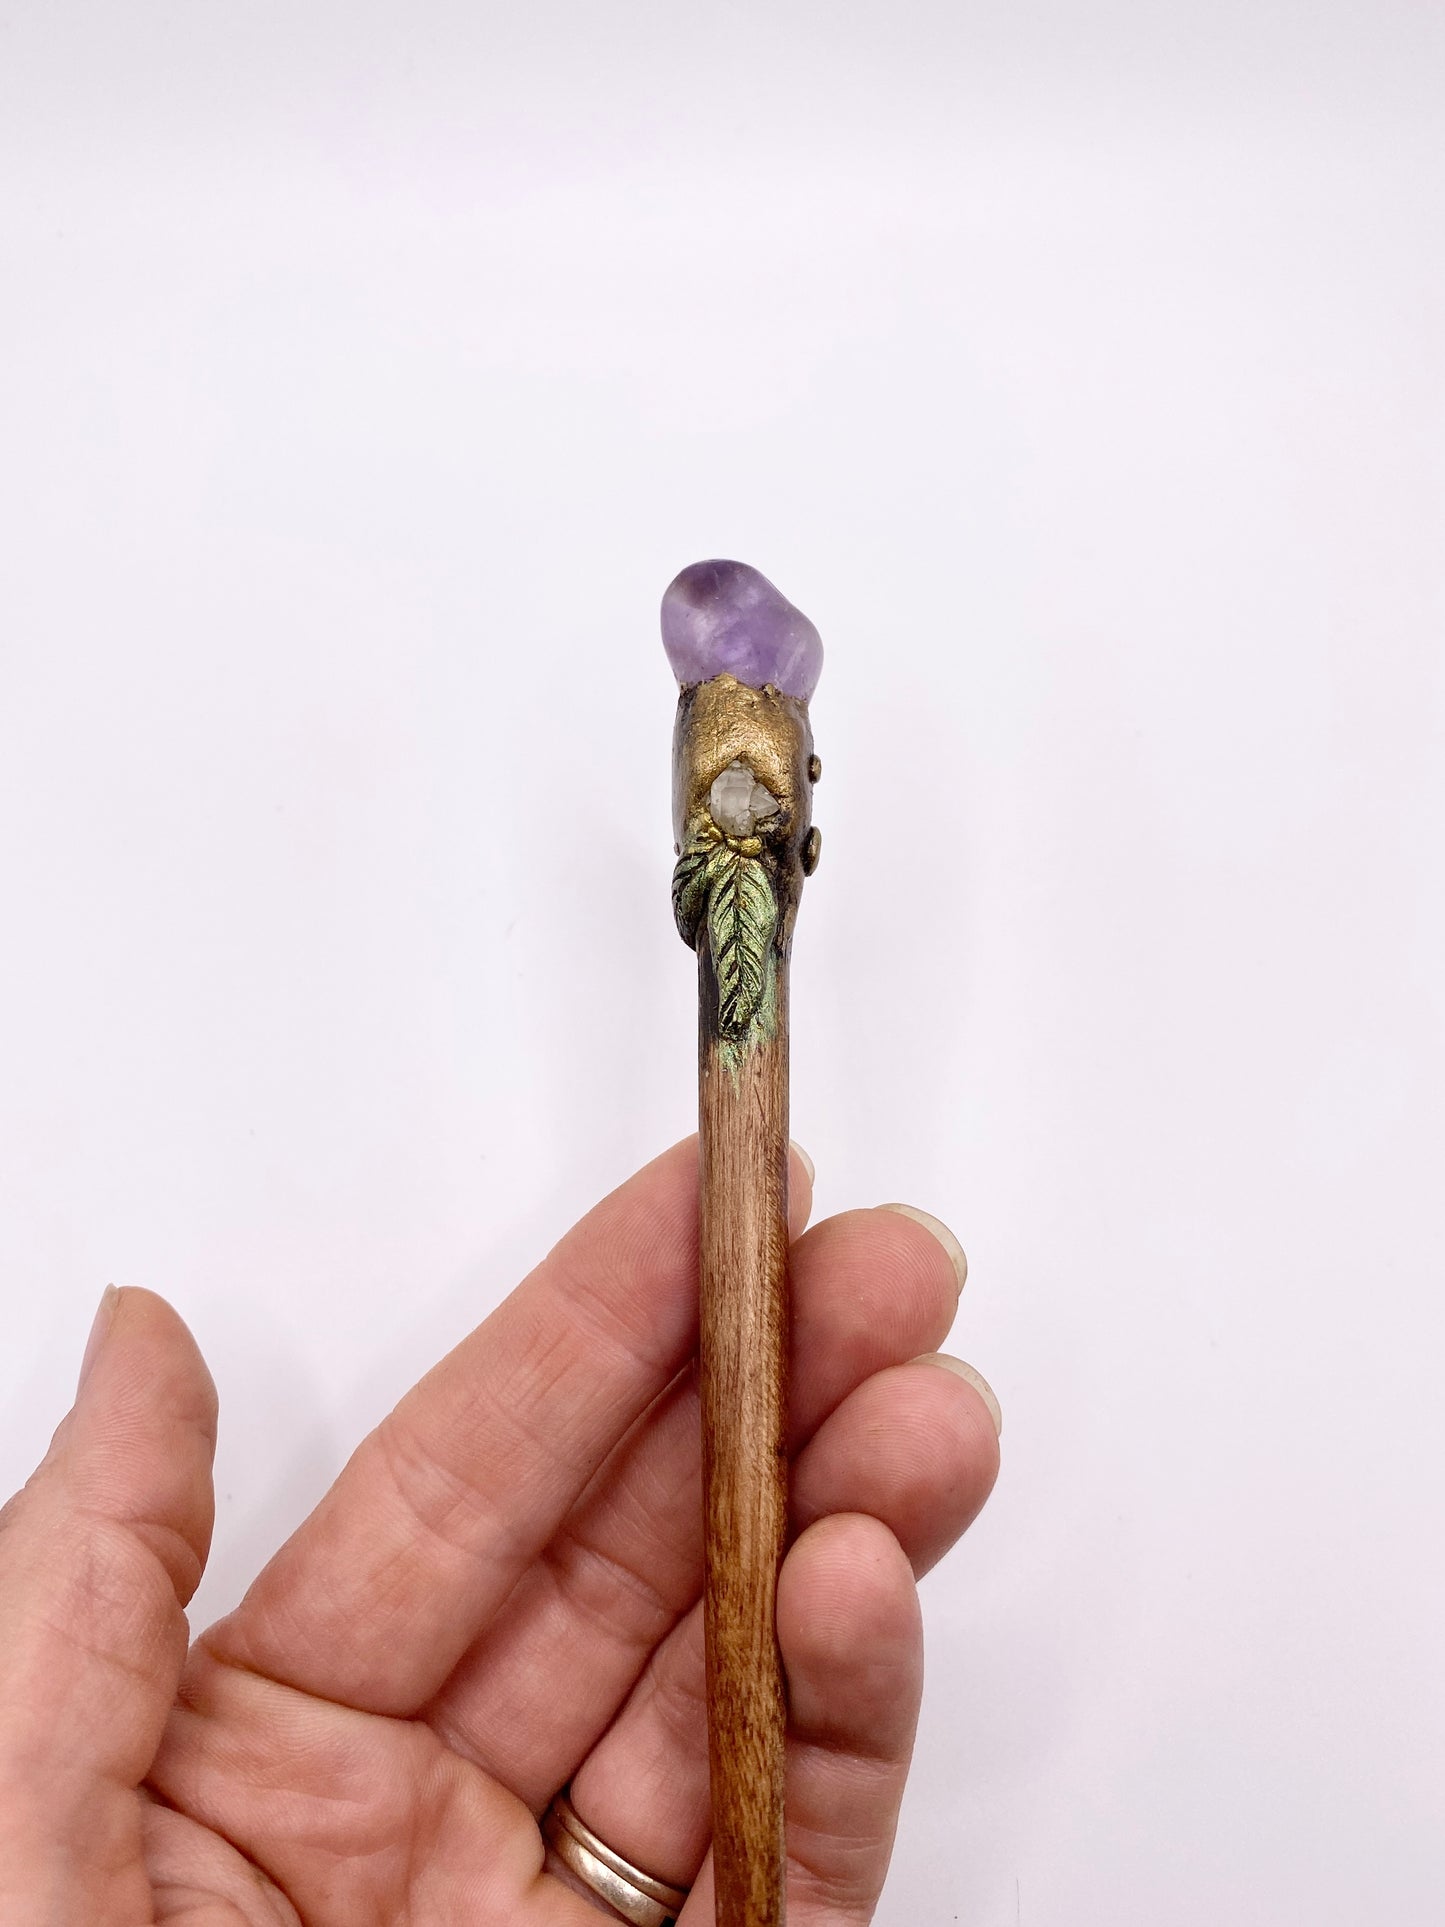 Amethyst Hair Wand with Quartz, Pyrite and Long Wood Handle - Hair Stick